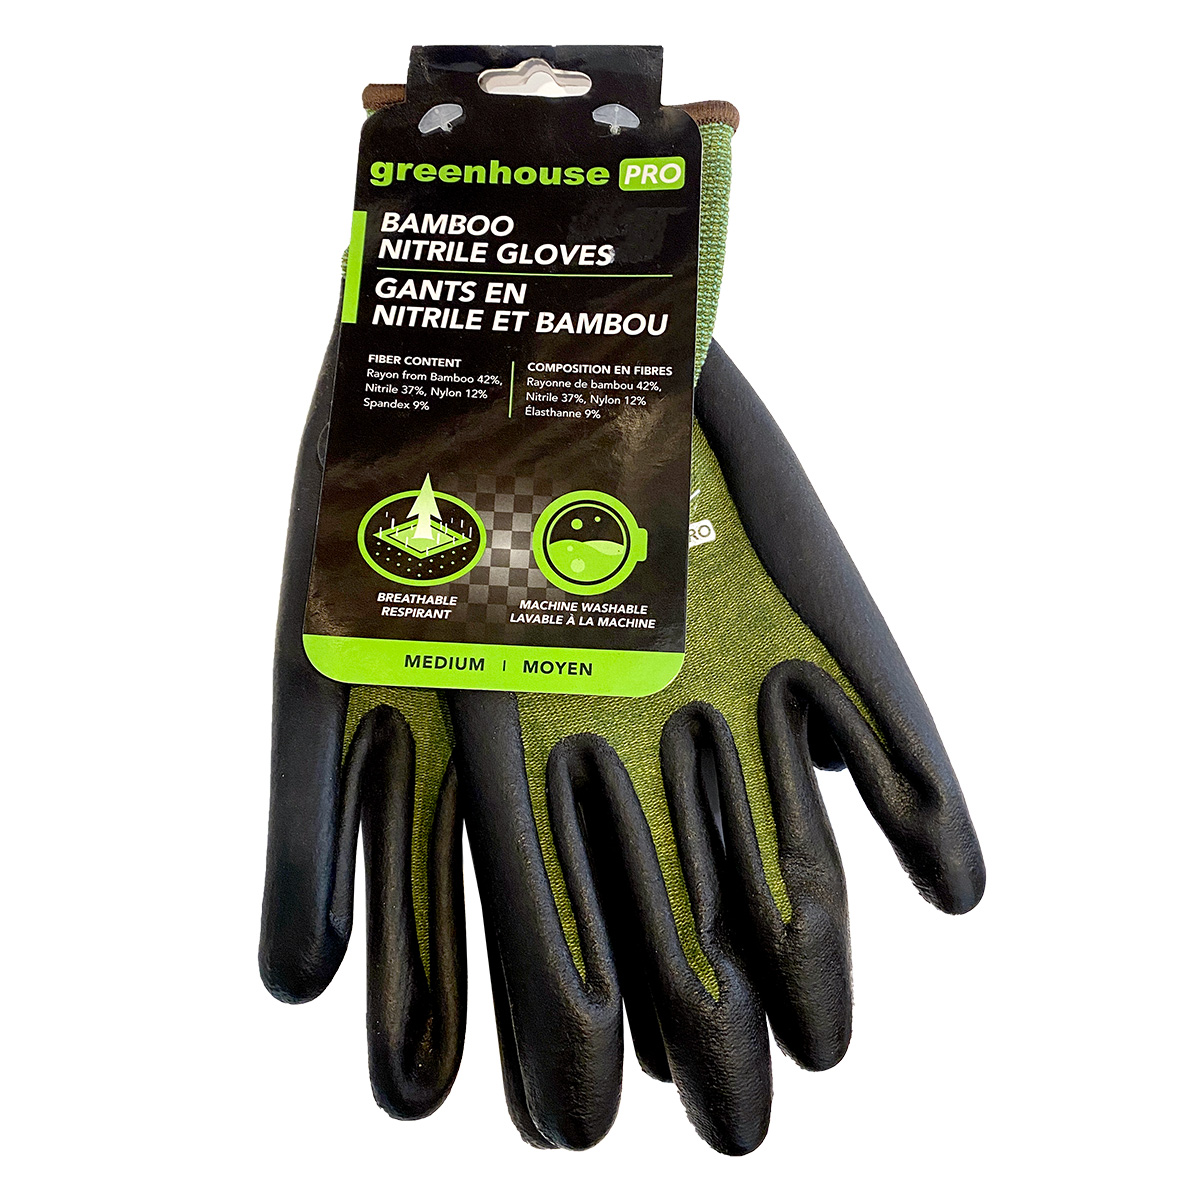 GREENHOUSE PRO Bamboo Nitrile Gloves SMALL